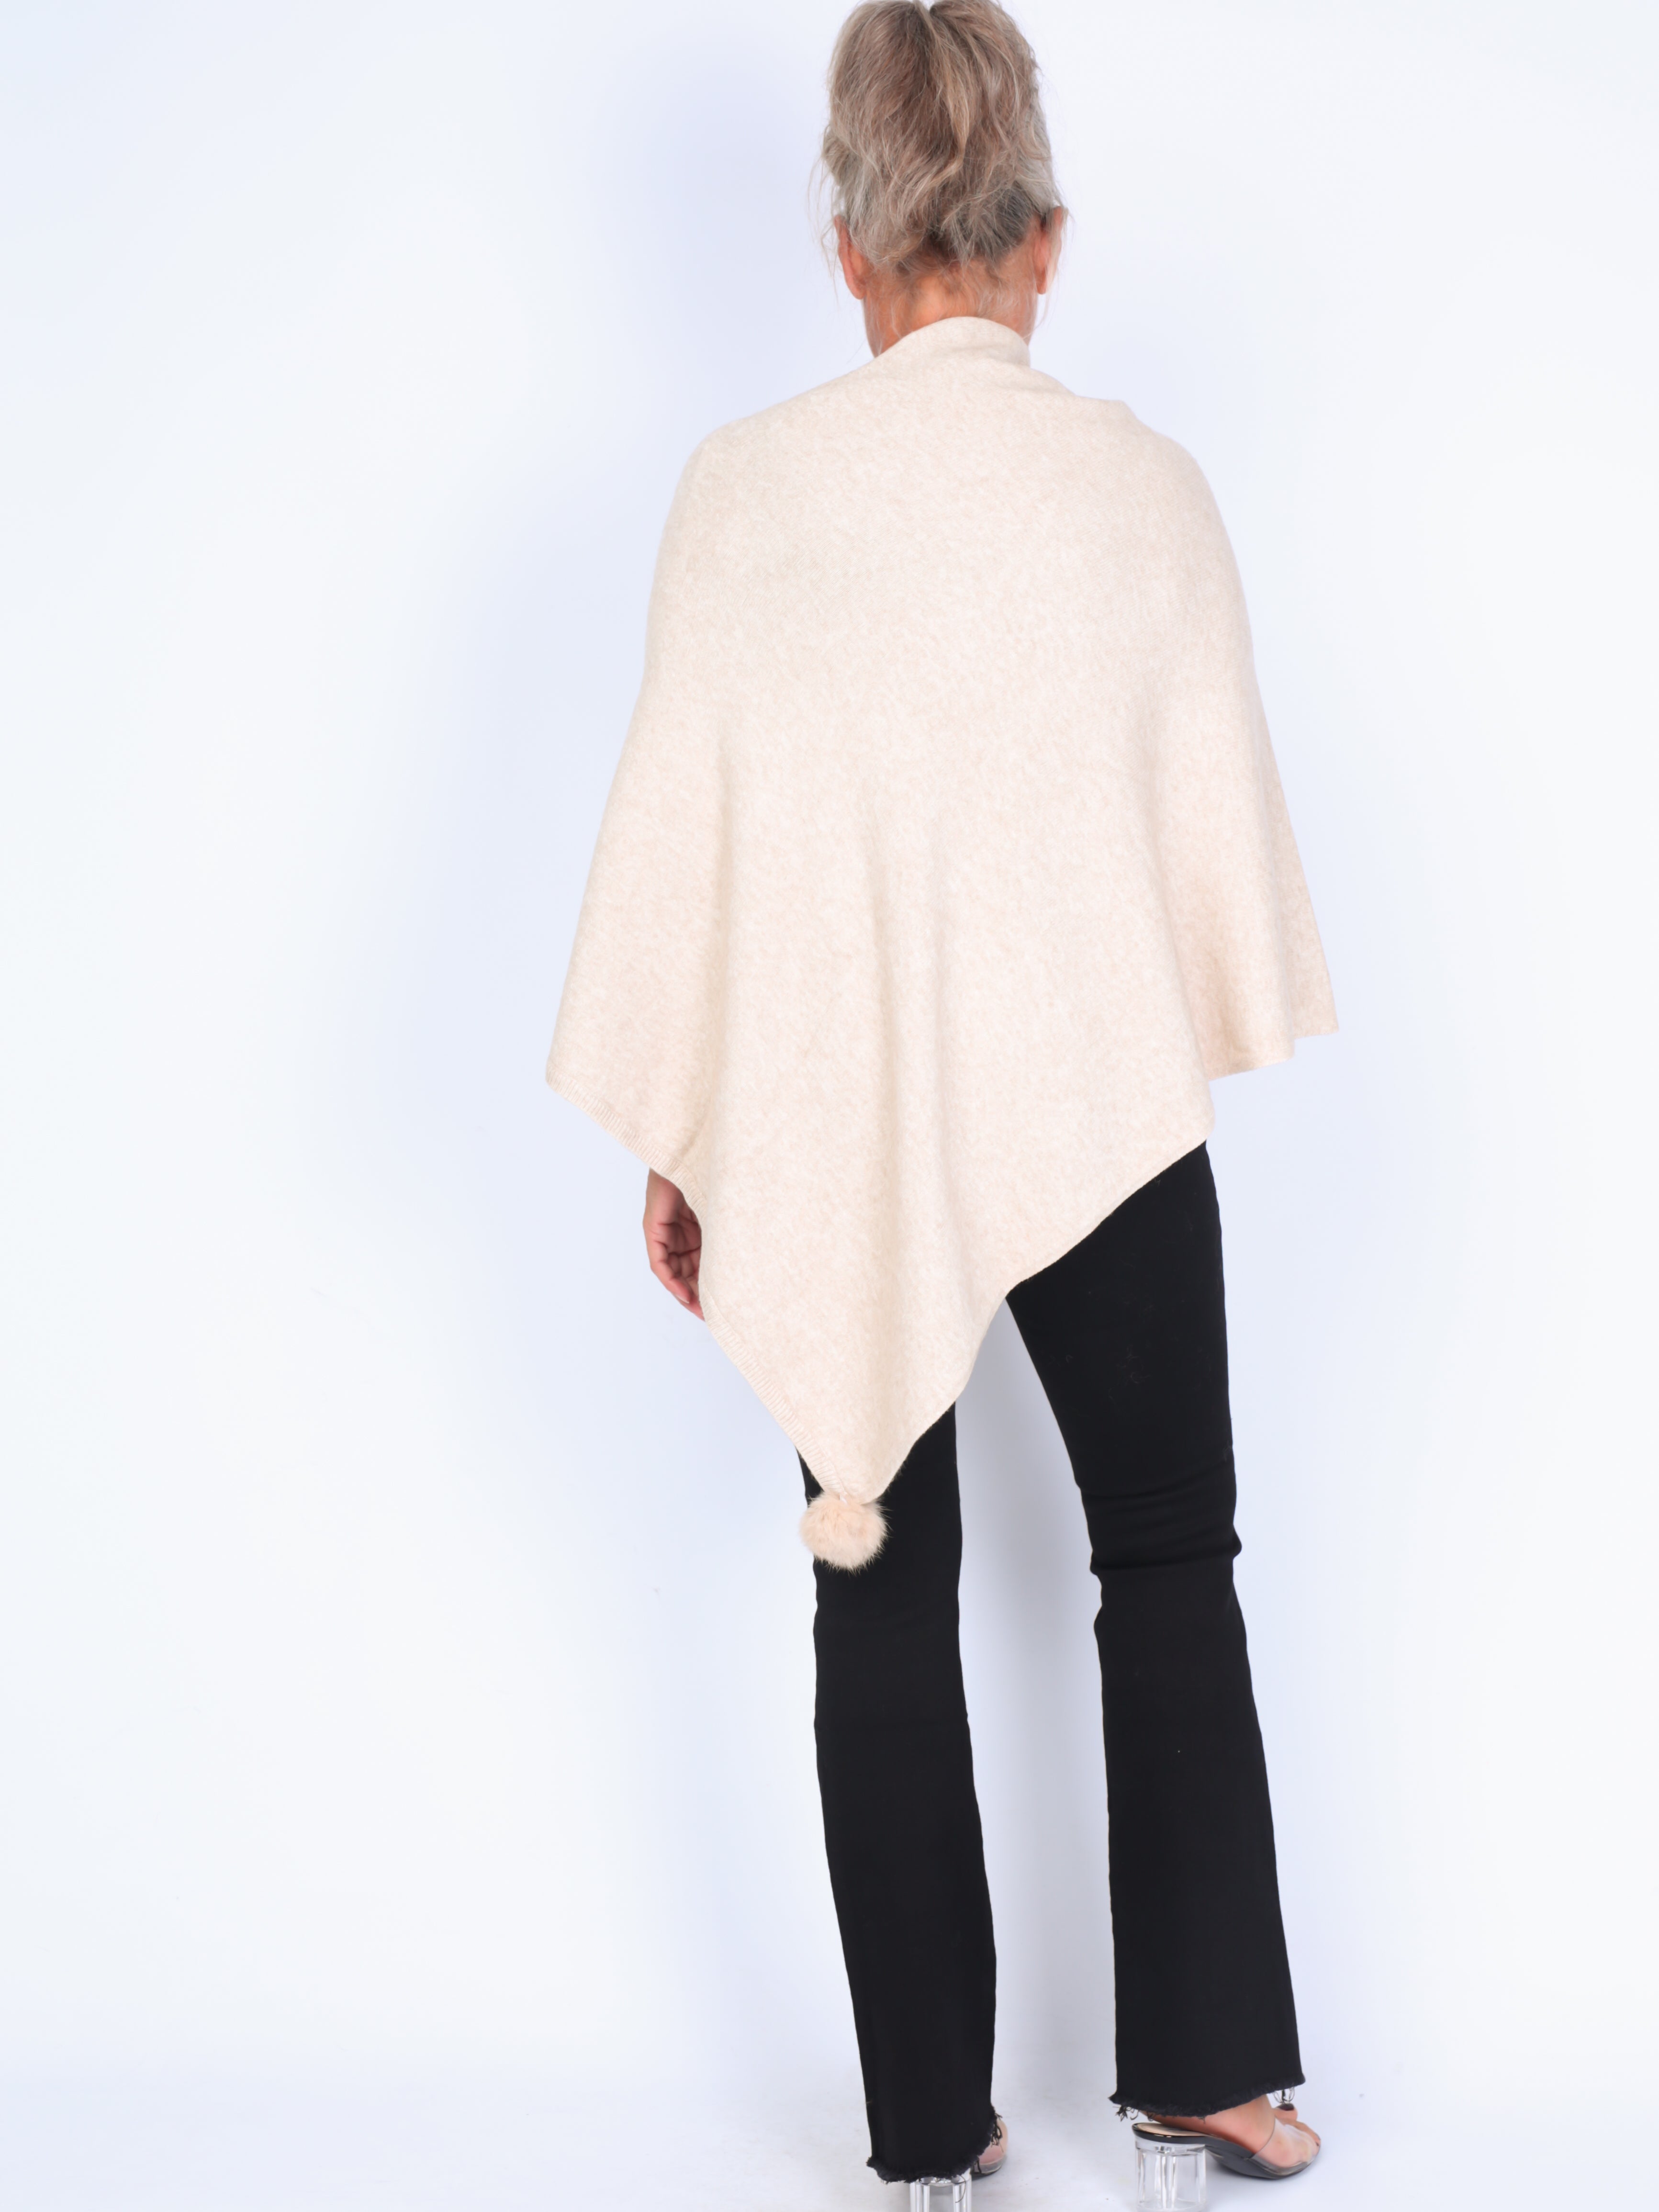 Krone 1 poncho with bling